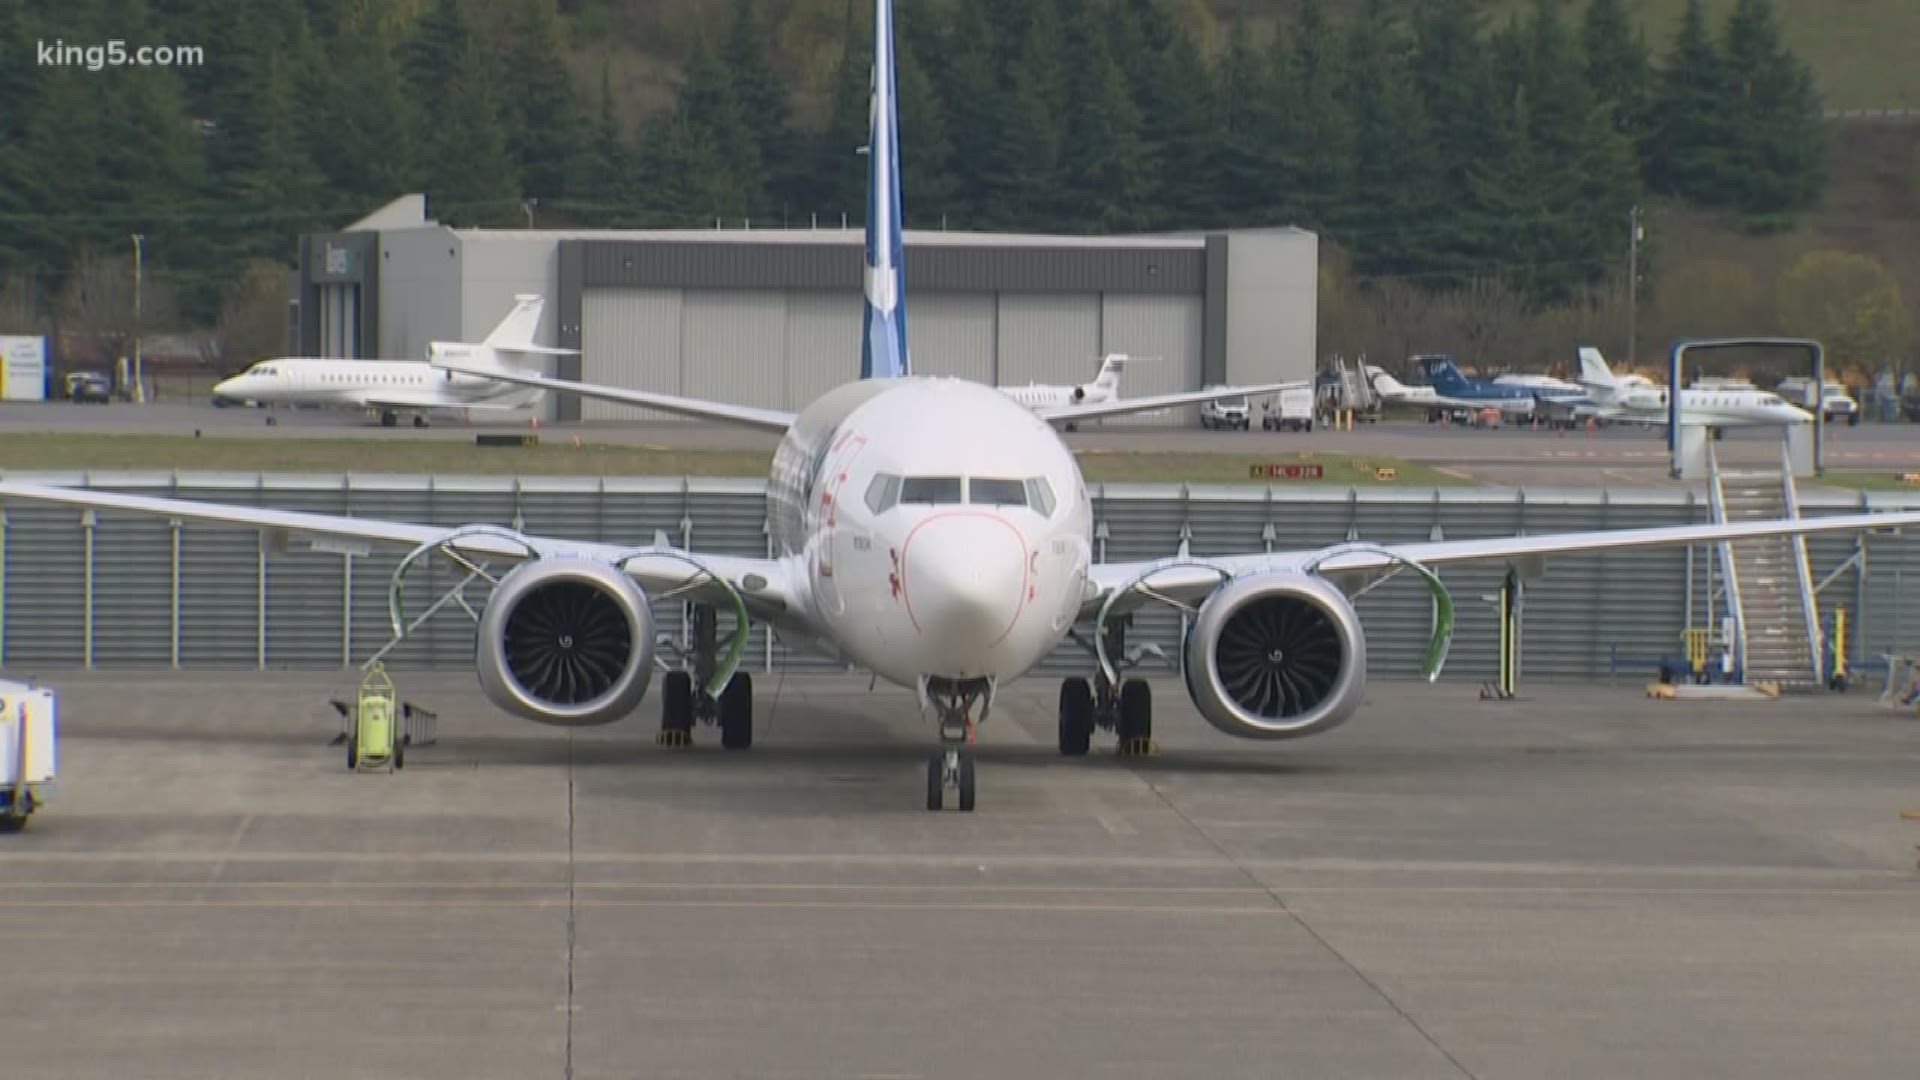 The Head of the House Committee on Transportation and Infrastructure said he's been made aware of another issue with the 737 MAX.